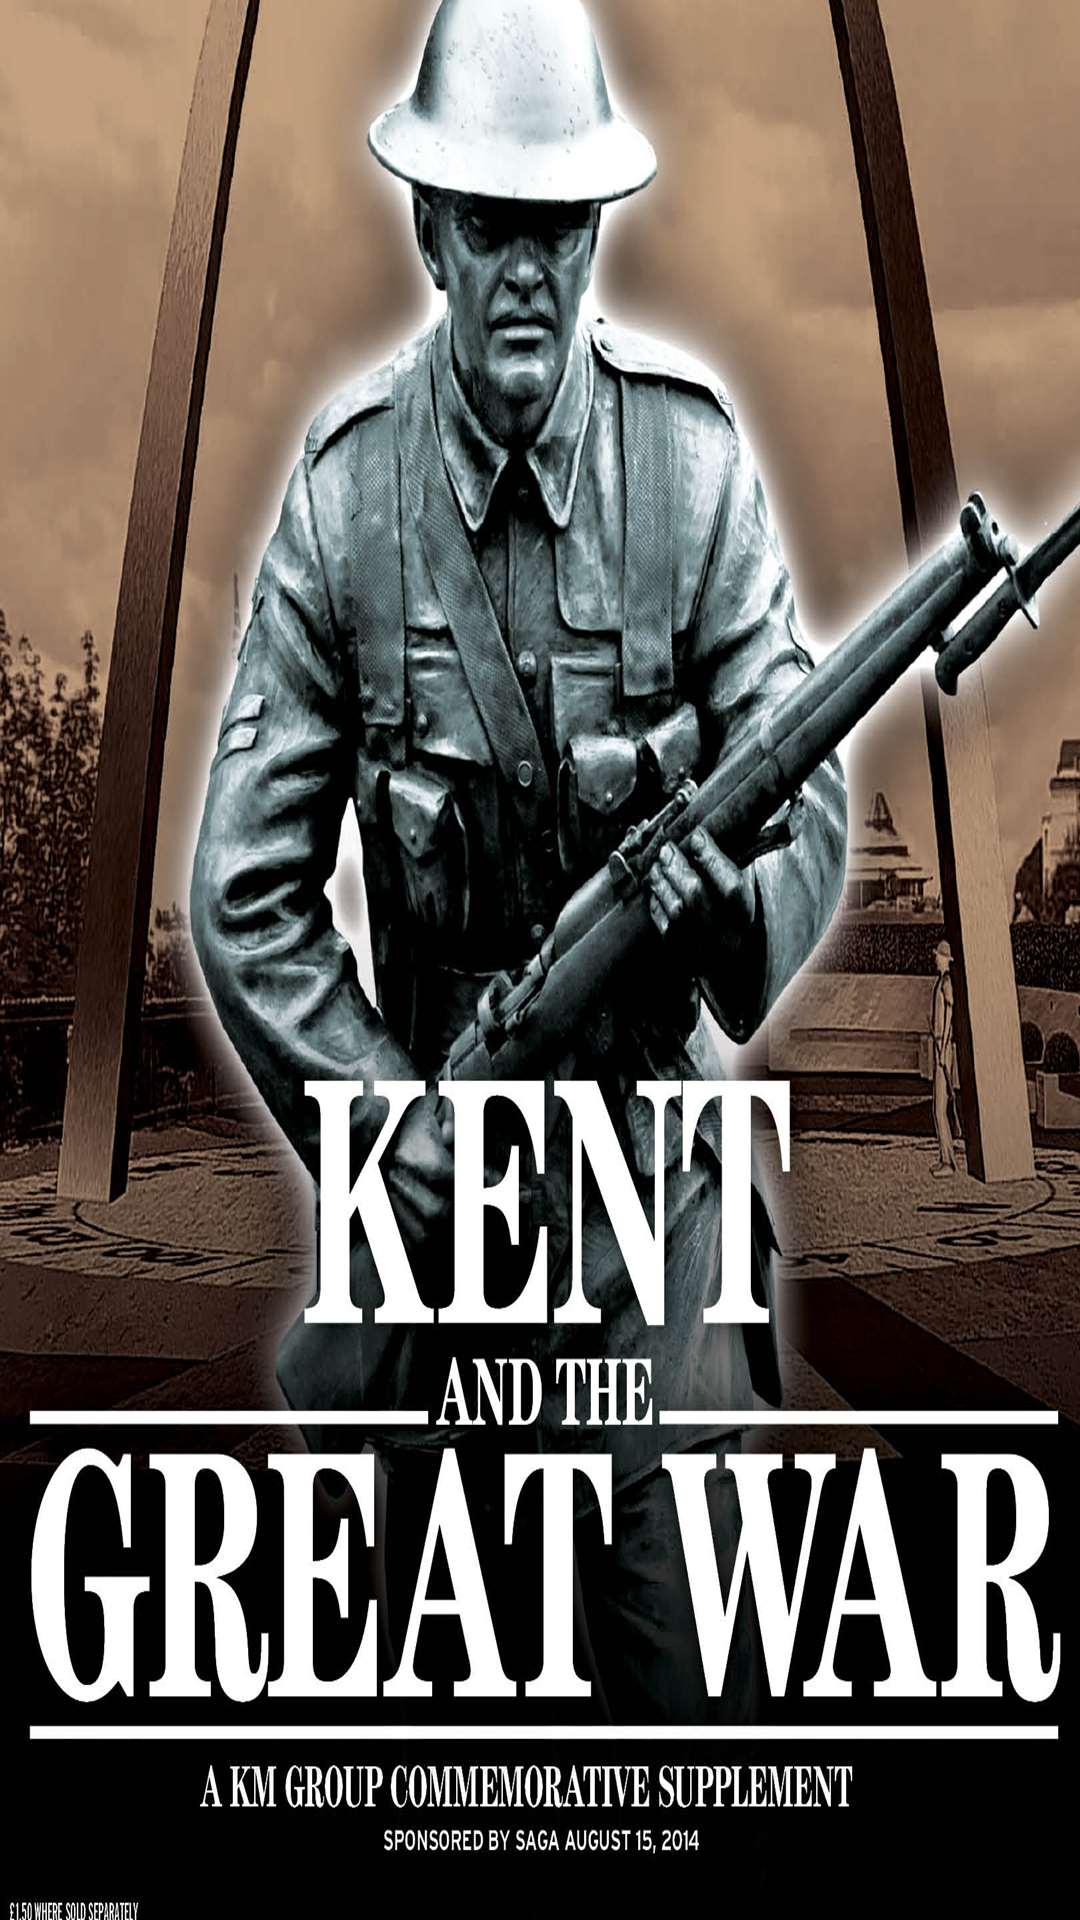 Kent and the Great War will be out this Friday